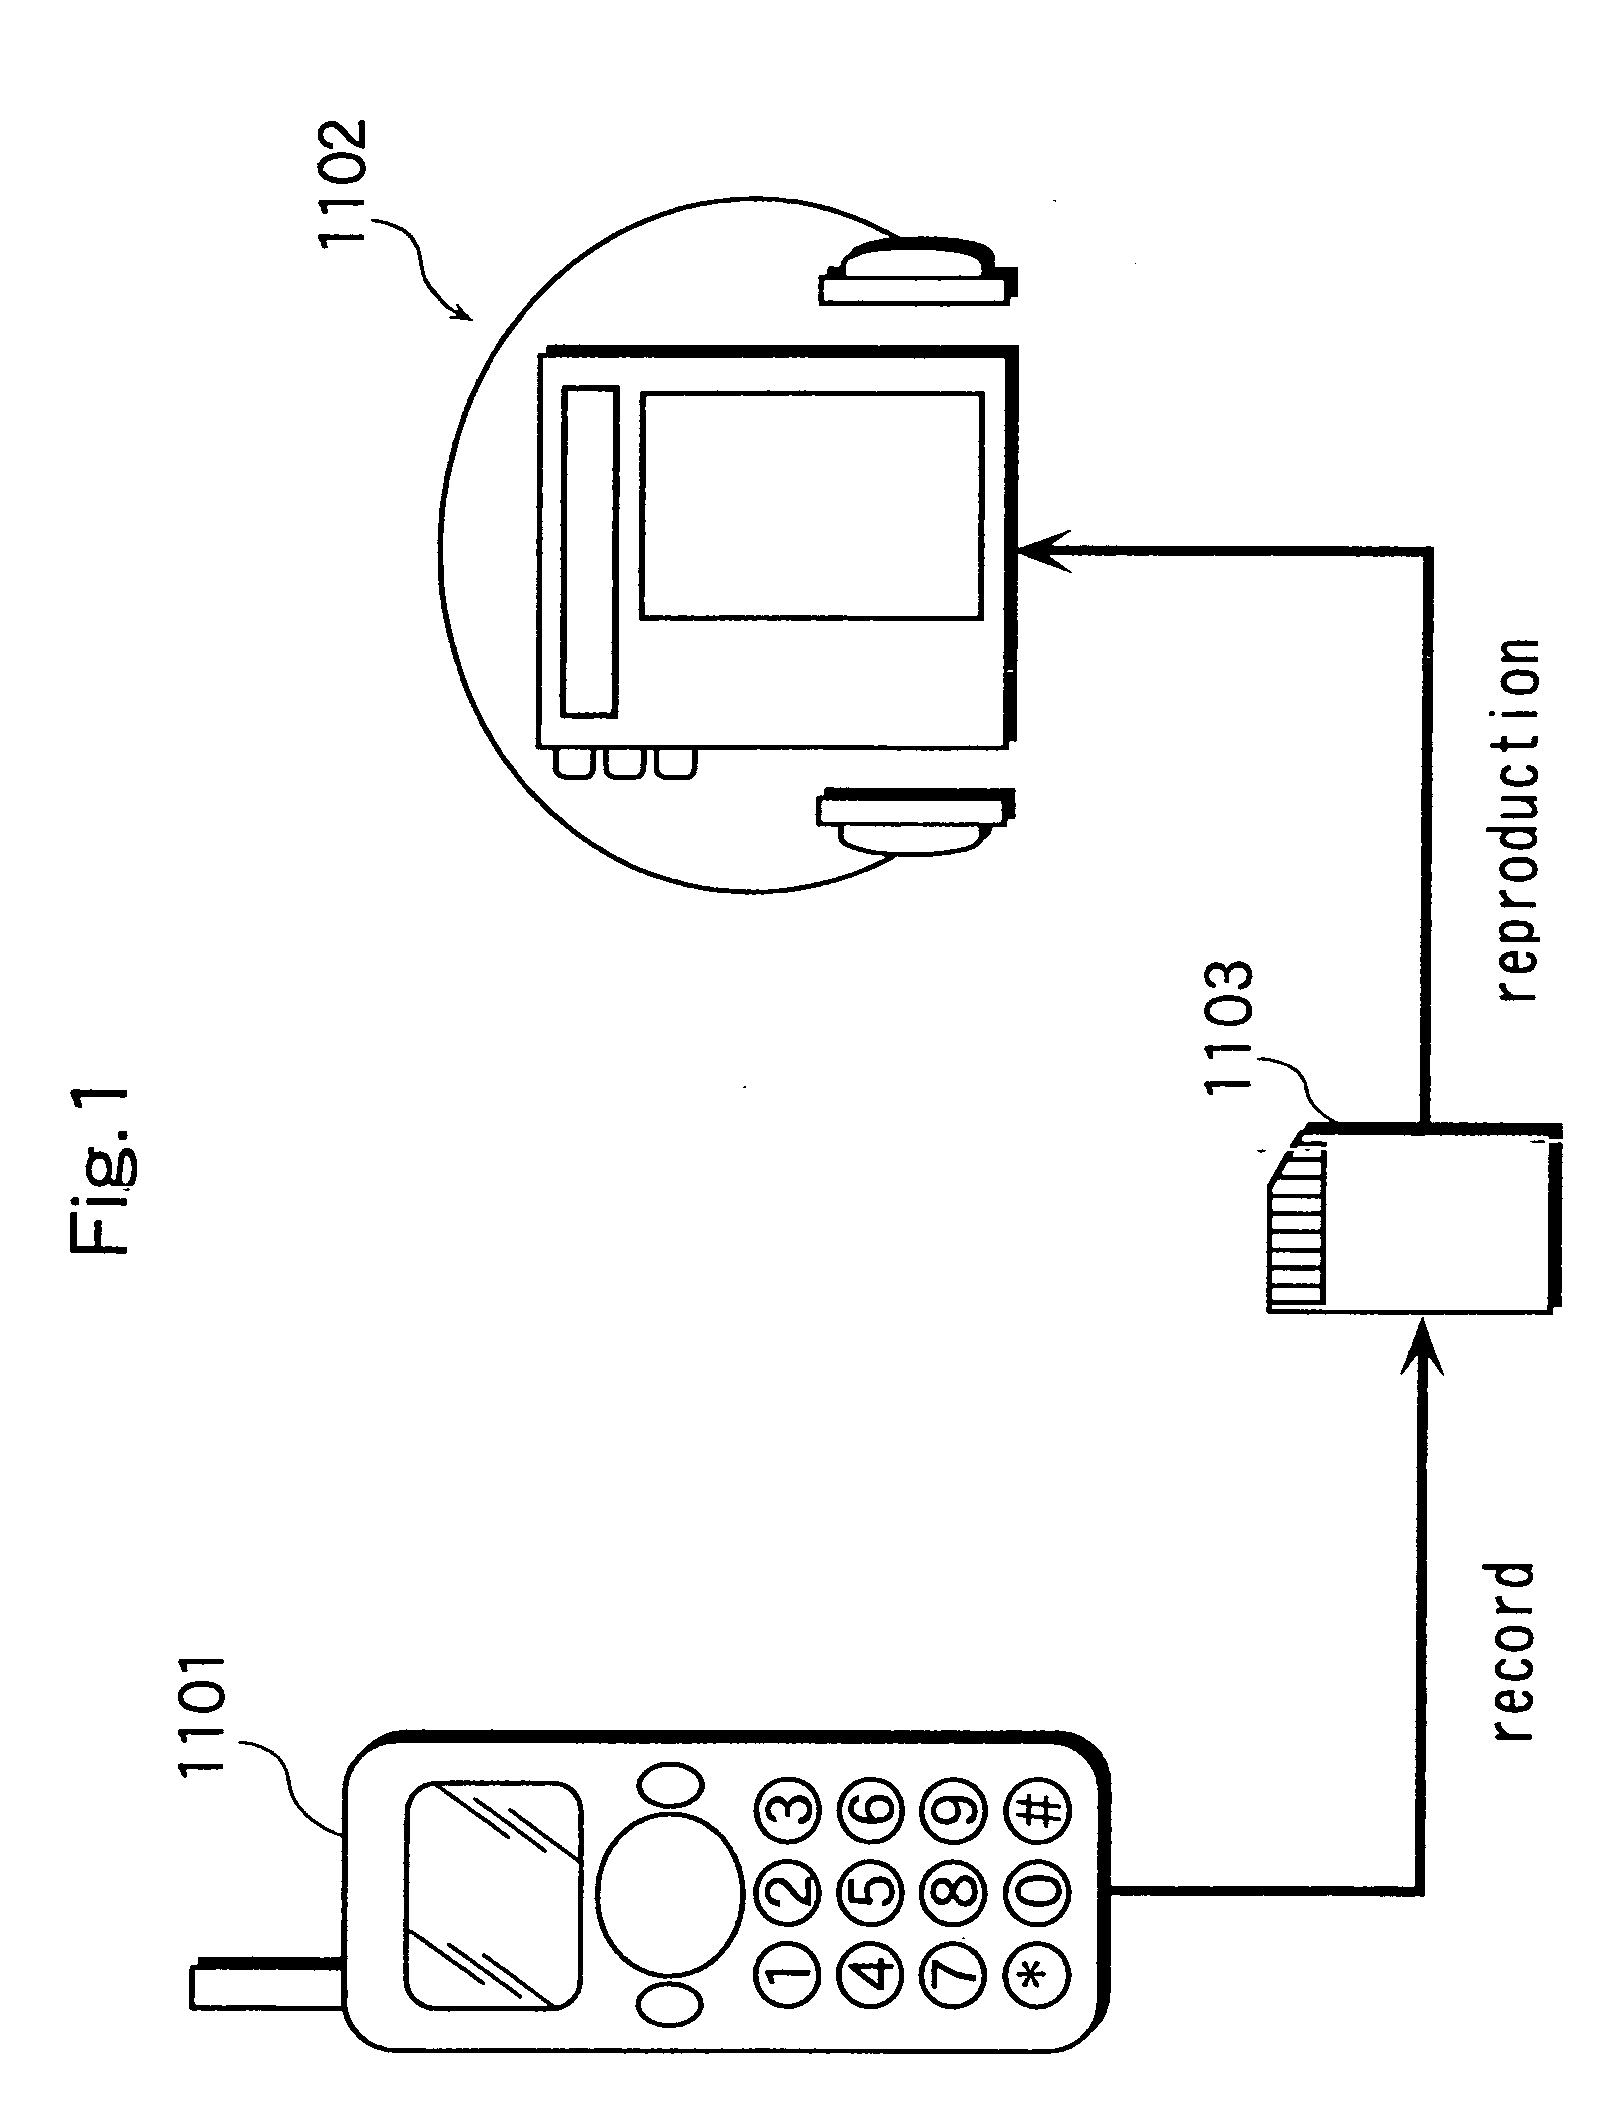 Mobile phone with music reproduction function, music data reproduction method by mobile phone with music reproduction function, and the program thereof